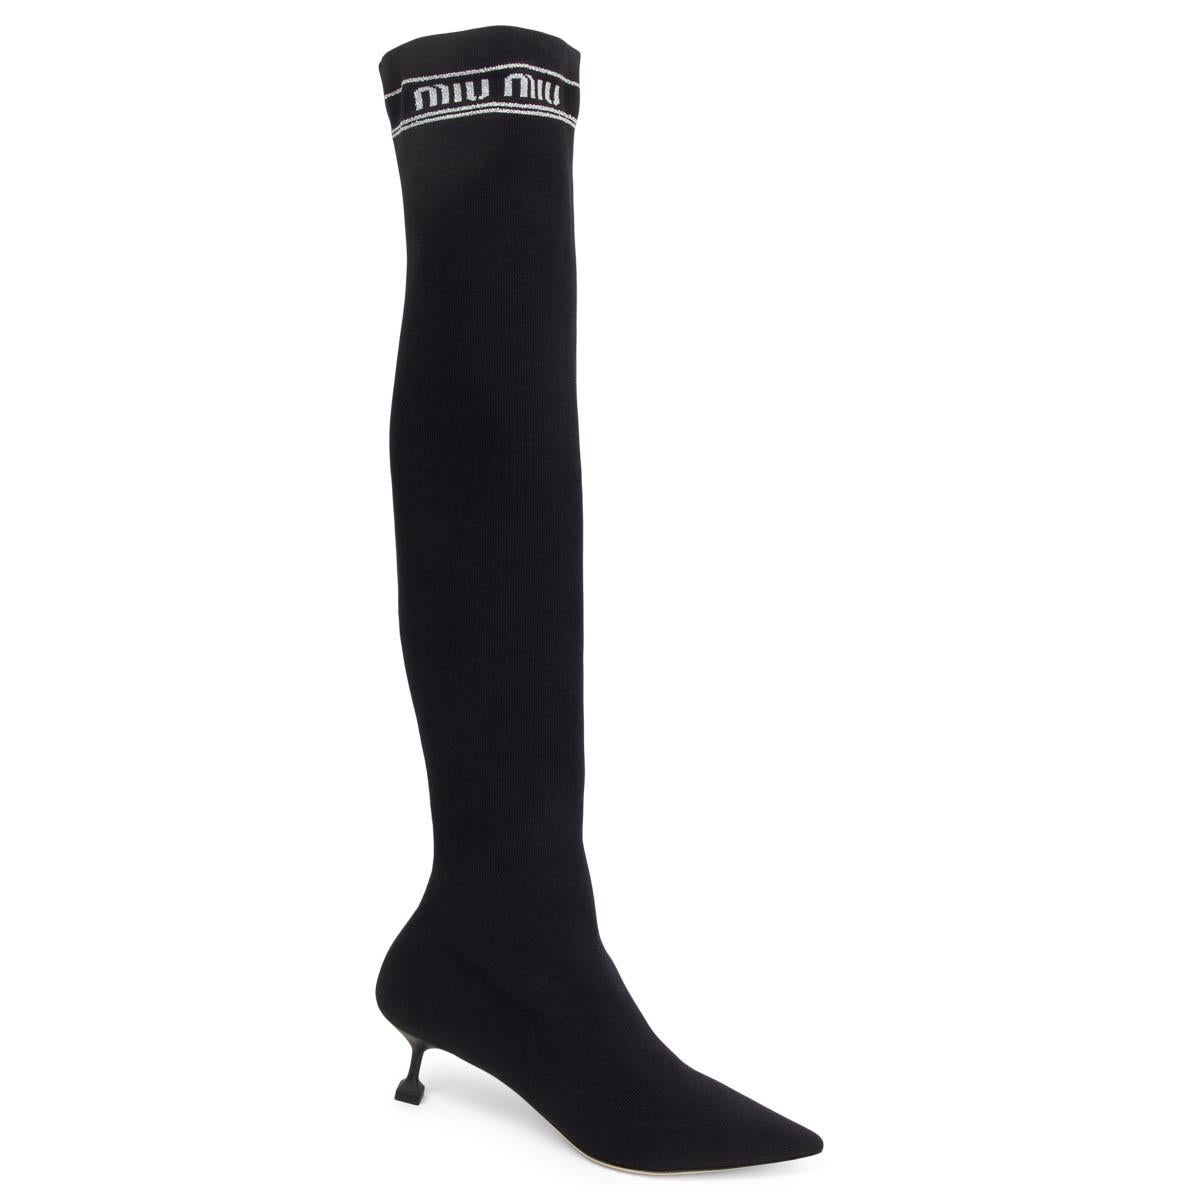 100% authentic Miu Miu kitten heel pointed-toe knee-high strechy sock boots in black fabric with silver lurex logo stitching on the side. Brand new. Come with dust bags. 

Measurements
Imprinted Size	38.5
Shoe Size	38.5
Inside Sole	25.5cm